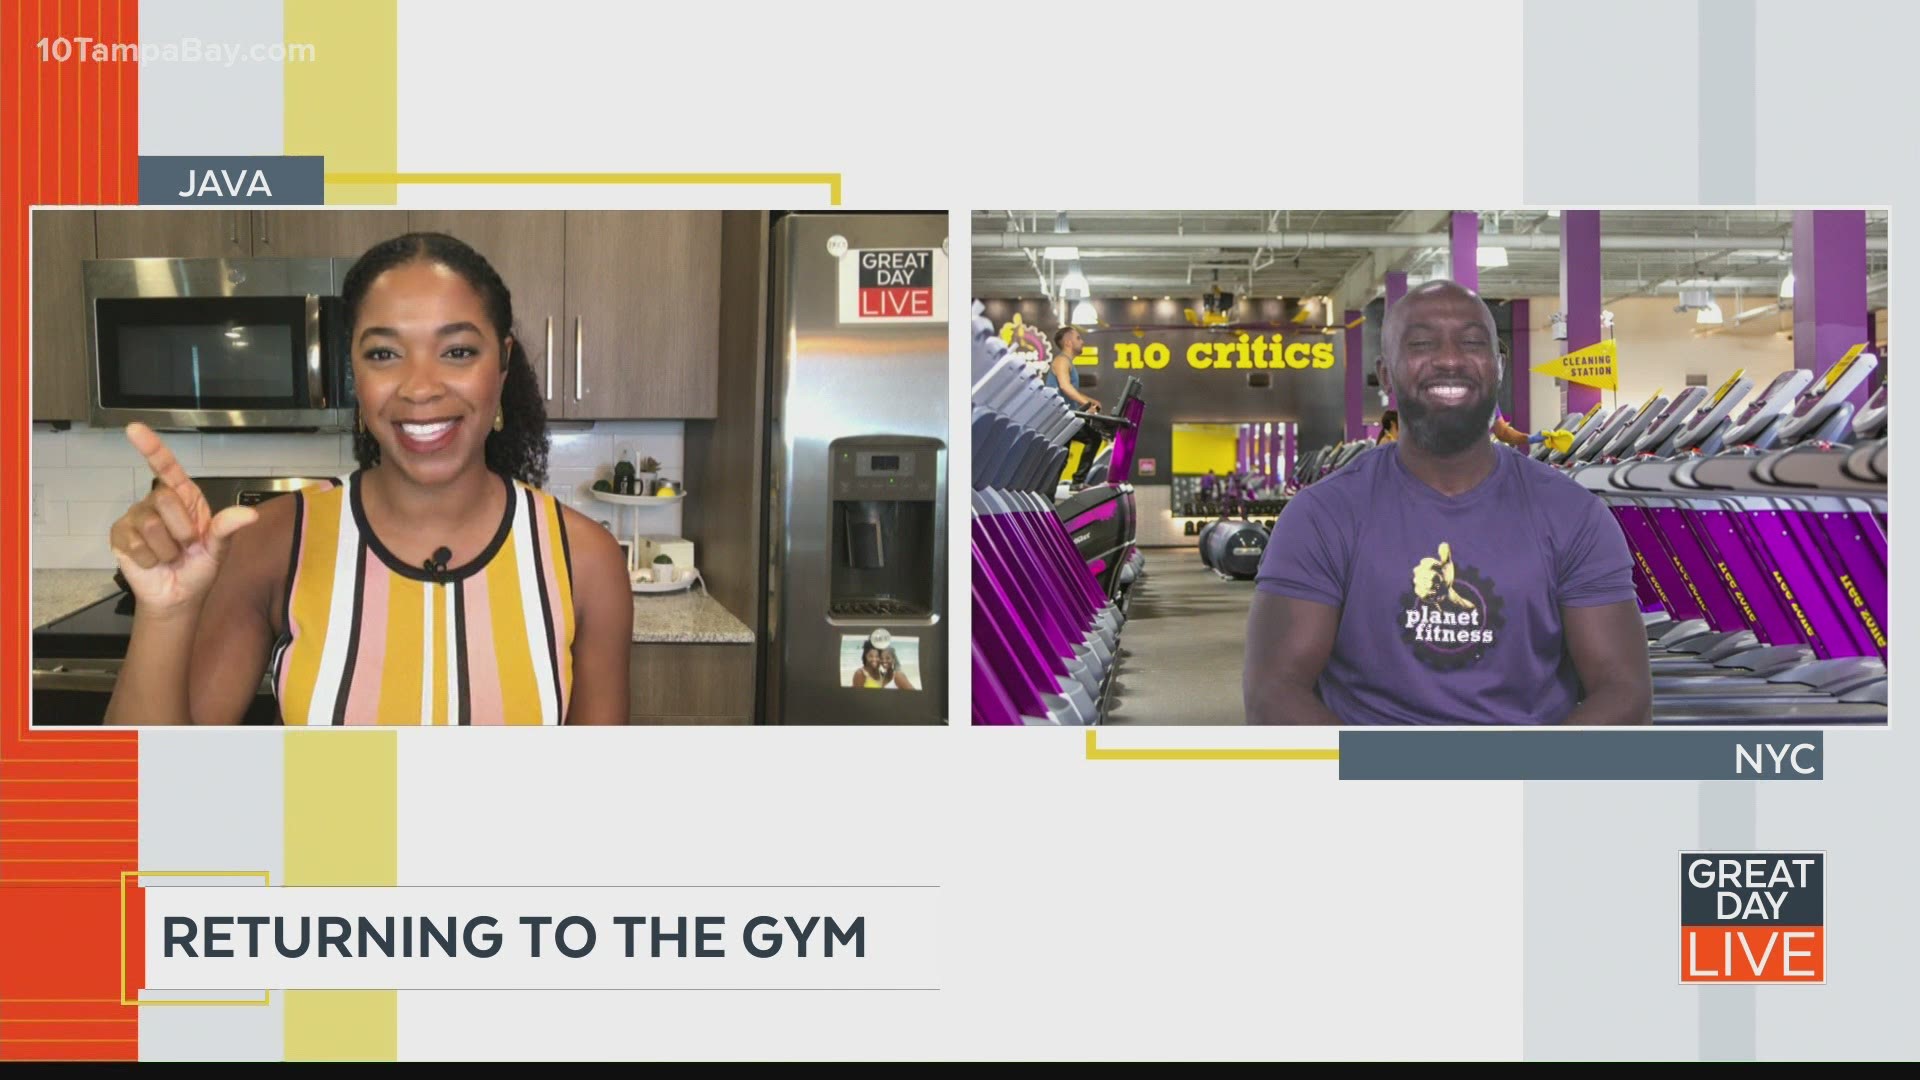 We talk to Planet Fitness about returning to the gym safely.